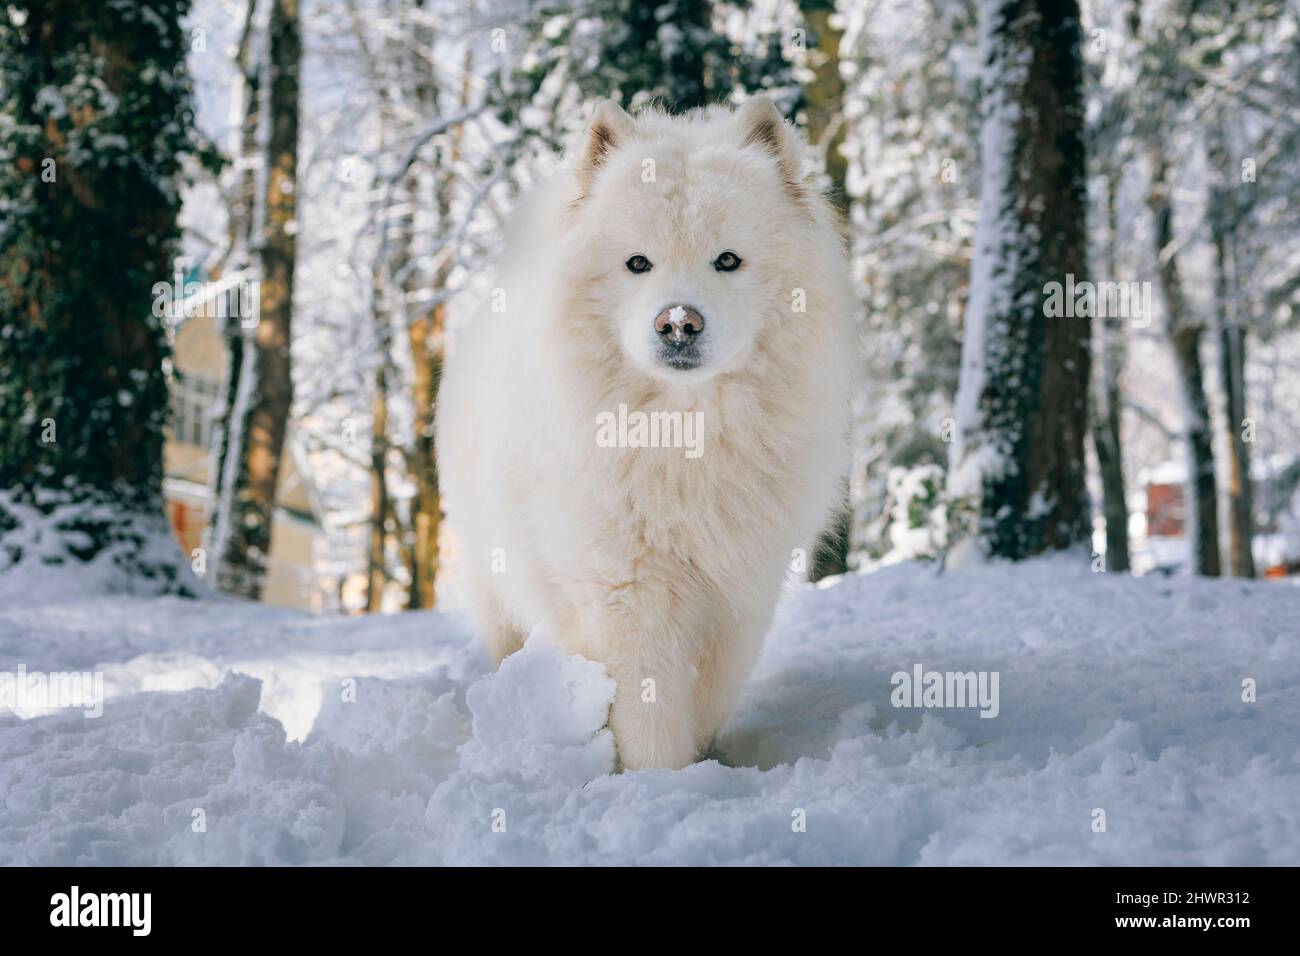 Samoyed dog walking on snow in forest Stock Photo